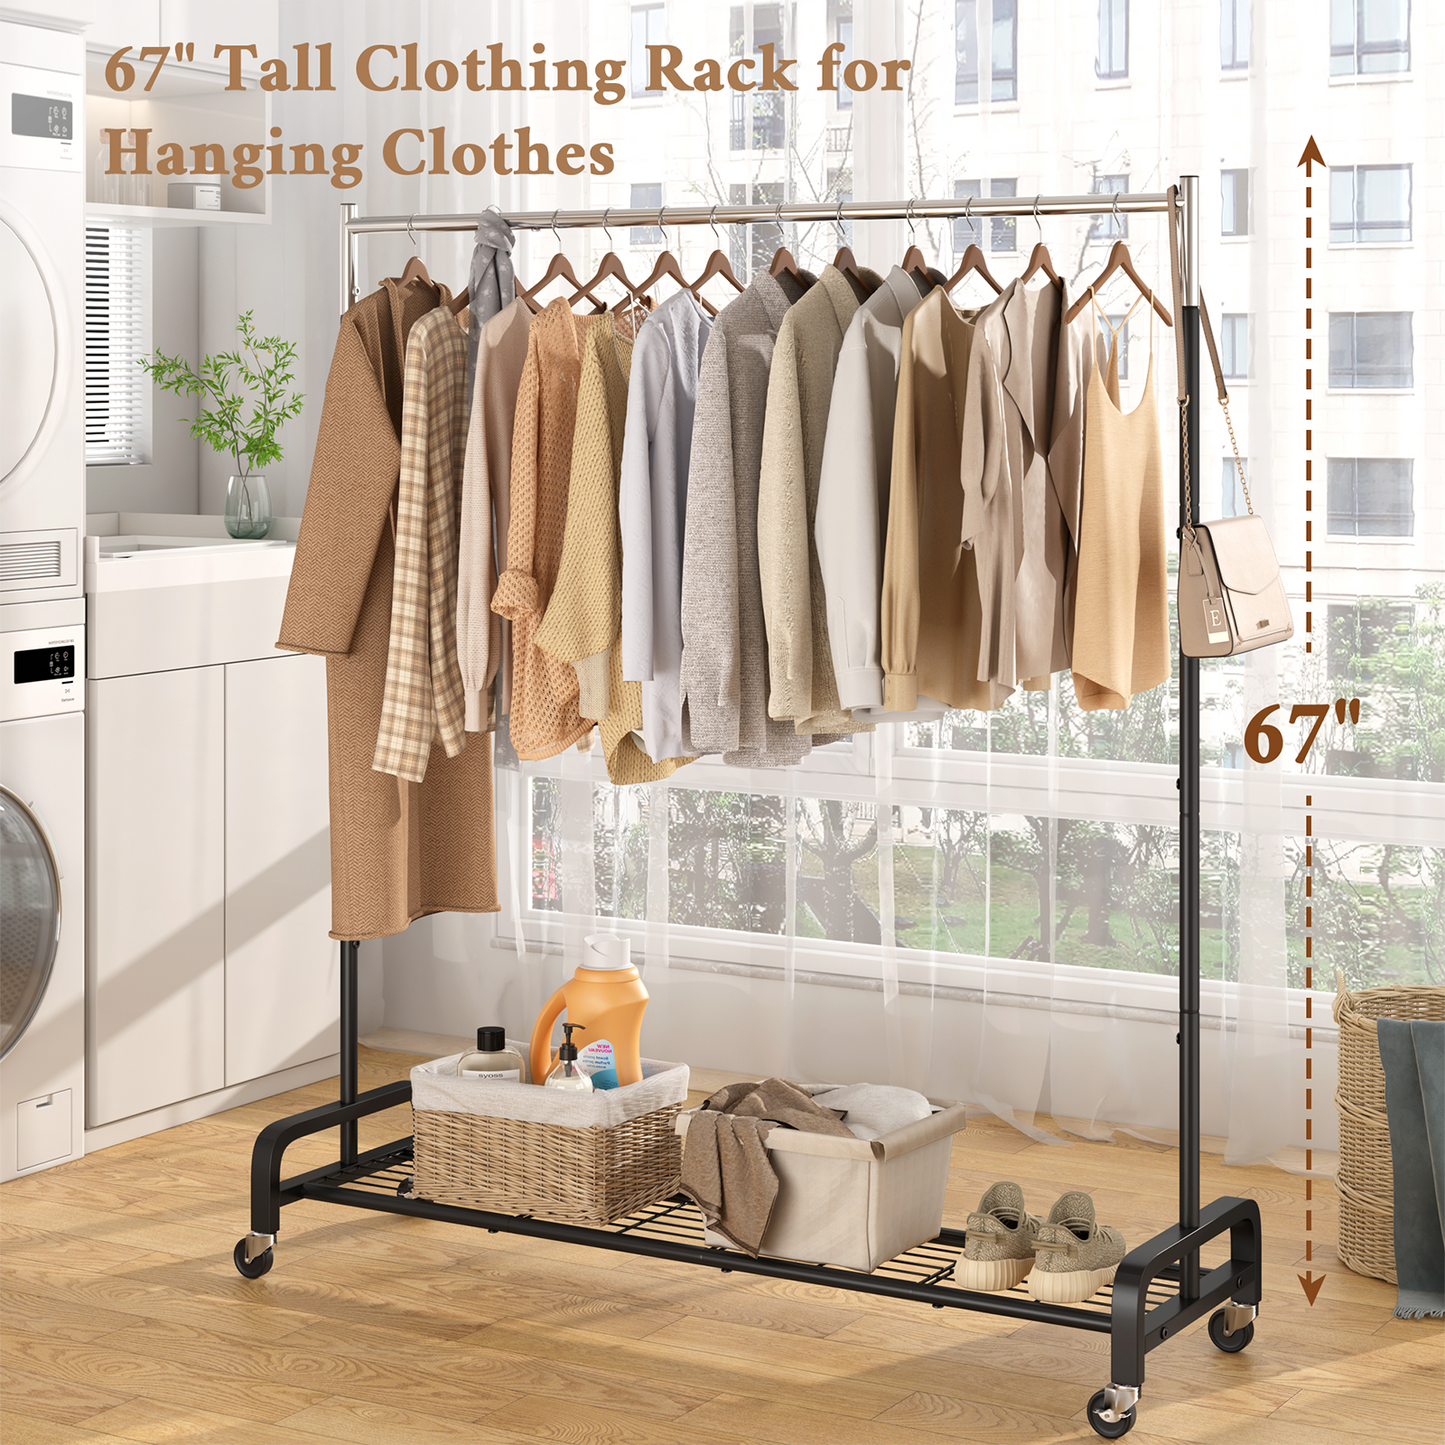 Mr IRONSTONE 400 lbs Heavy Duty Garment Rack, Rolling Clothes Rack with Wheels, Home Portable Closet Clothing Rack, Black